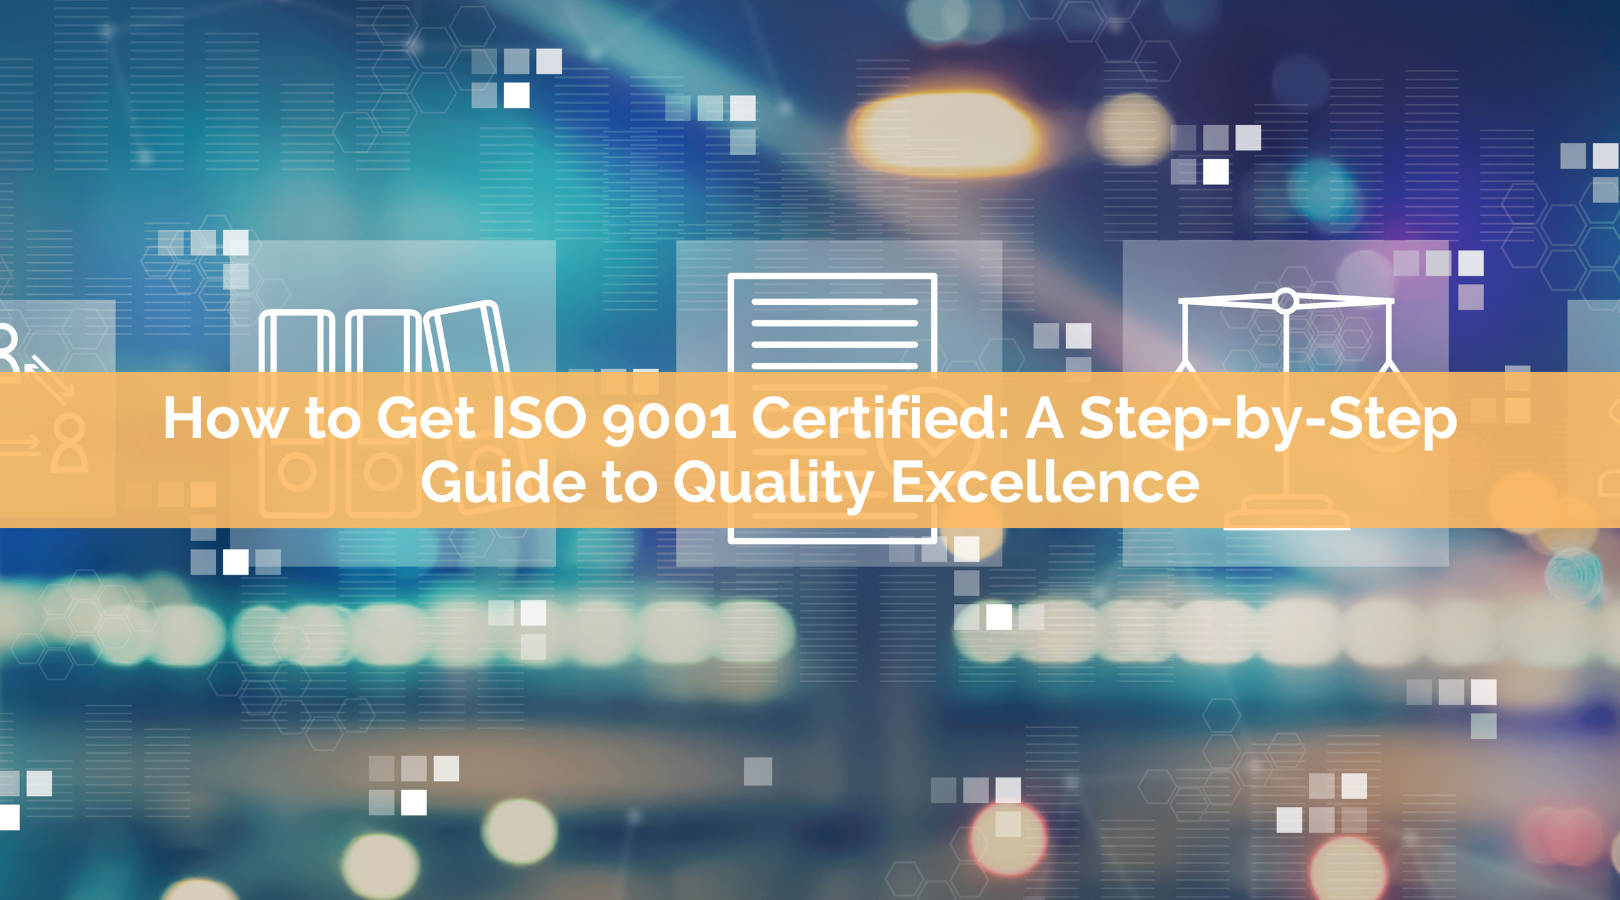 How to Get ISO 9001 Certified: A Step-by-Step Guide to Quality Excellence